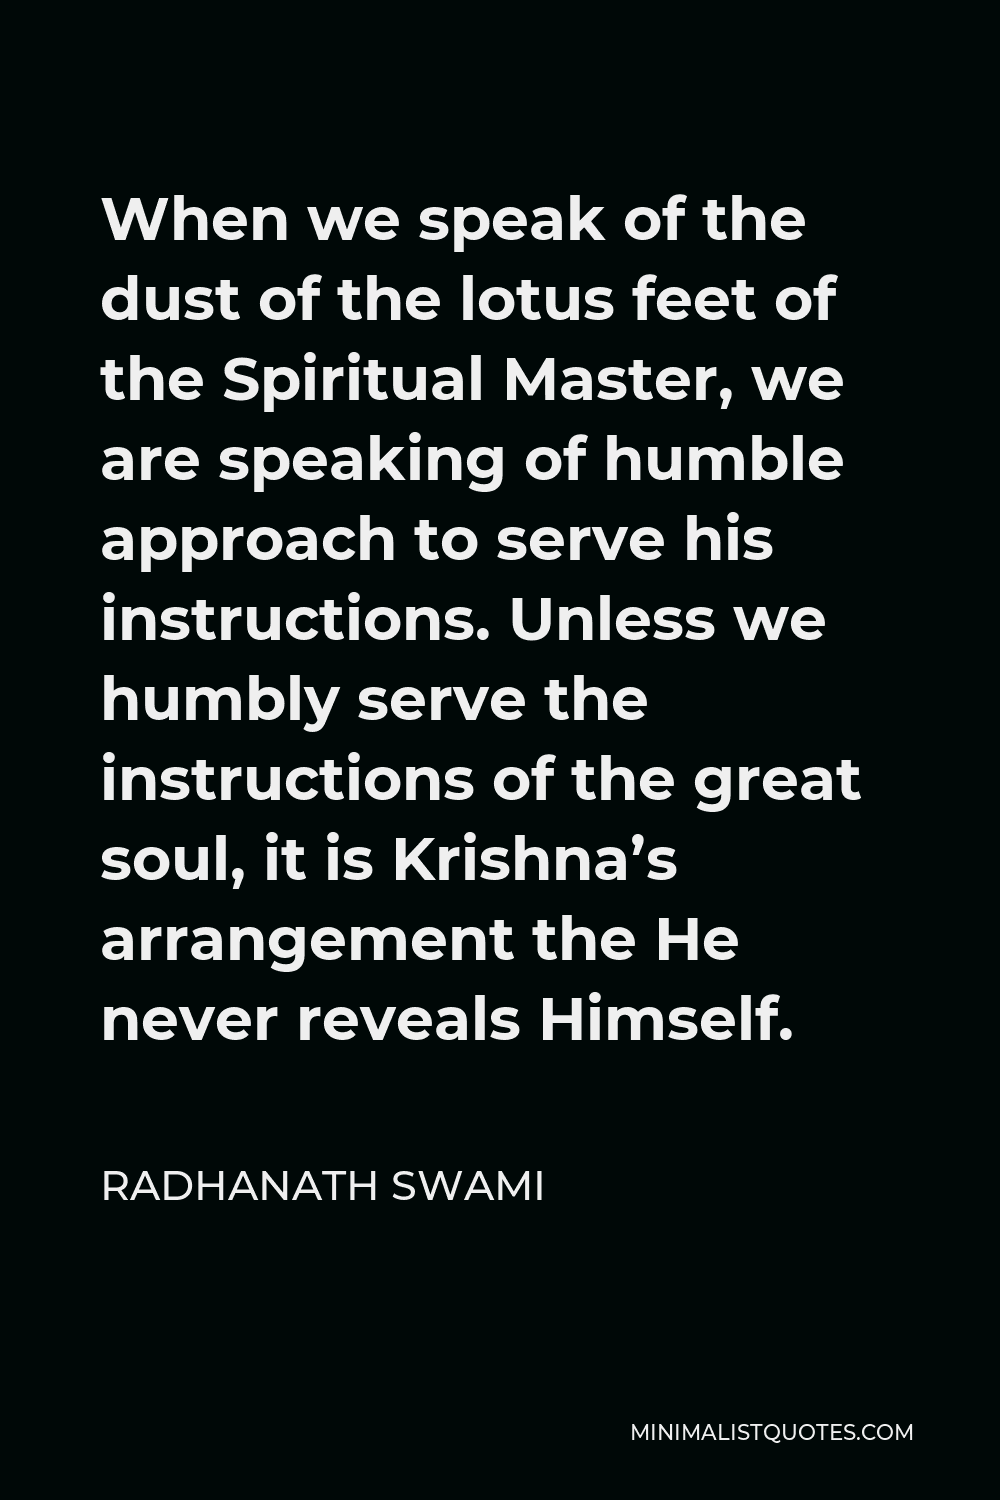 Radhanath Swami Quote - When we speak of the dust of the lotus feet of the Spiritual Master, we are speaking of humble approach to serve his instructions. Unless we humbly serve the instructions of the great soul, it is Krishna’s arrangement the He never reveals Himself.